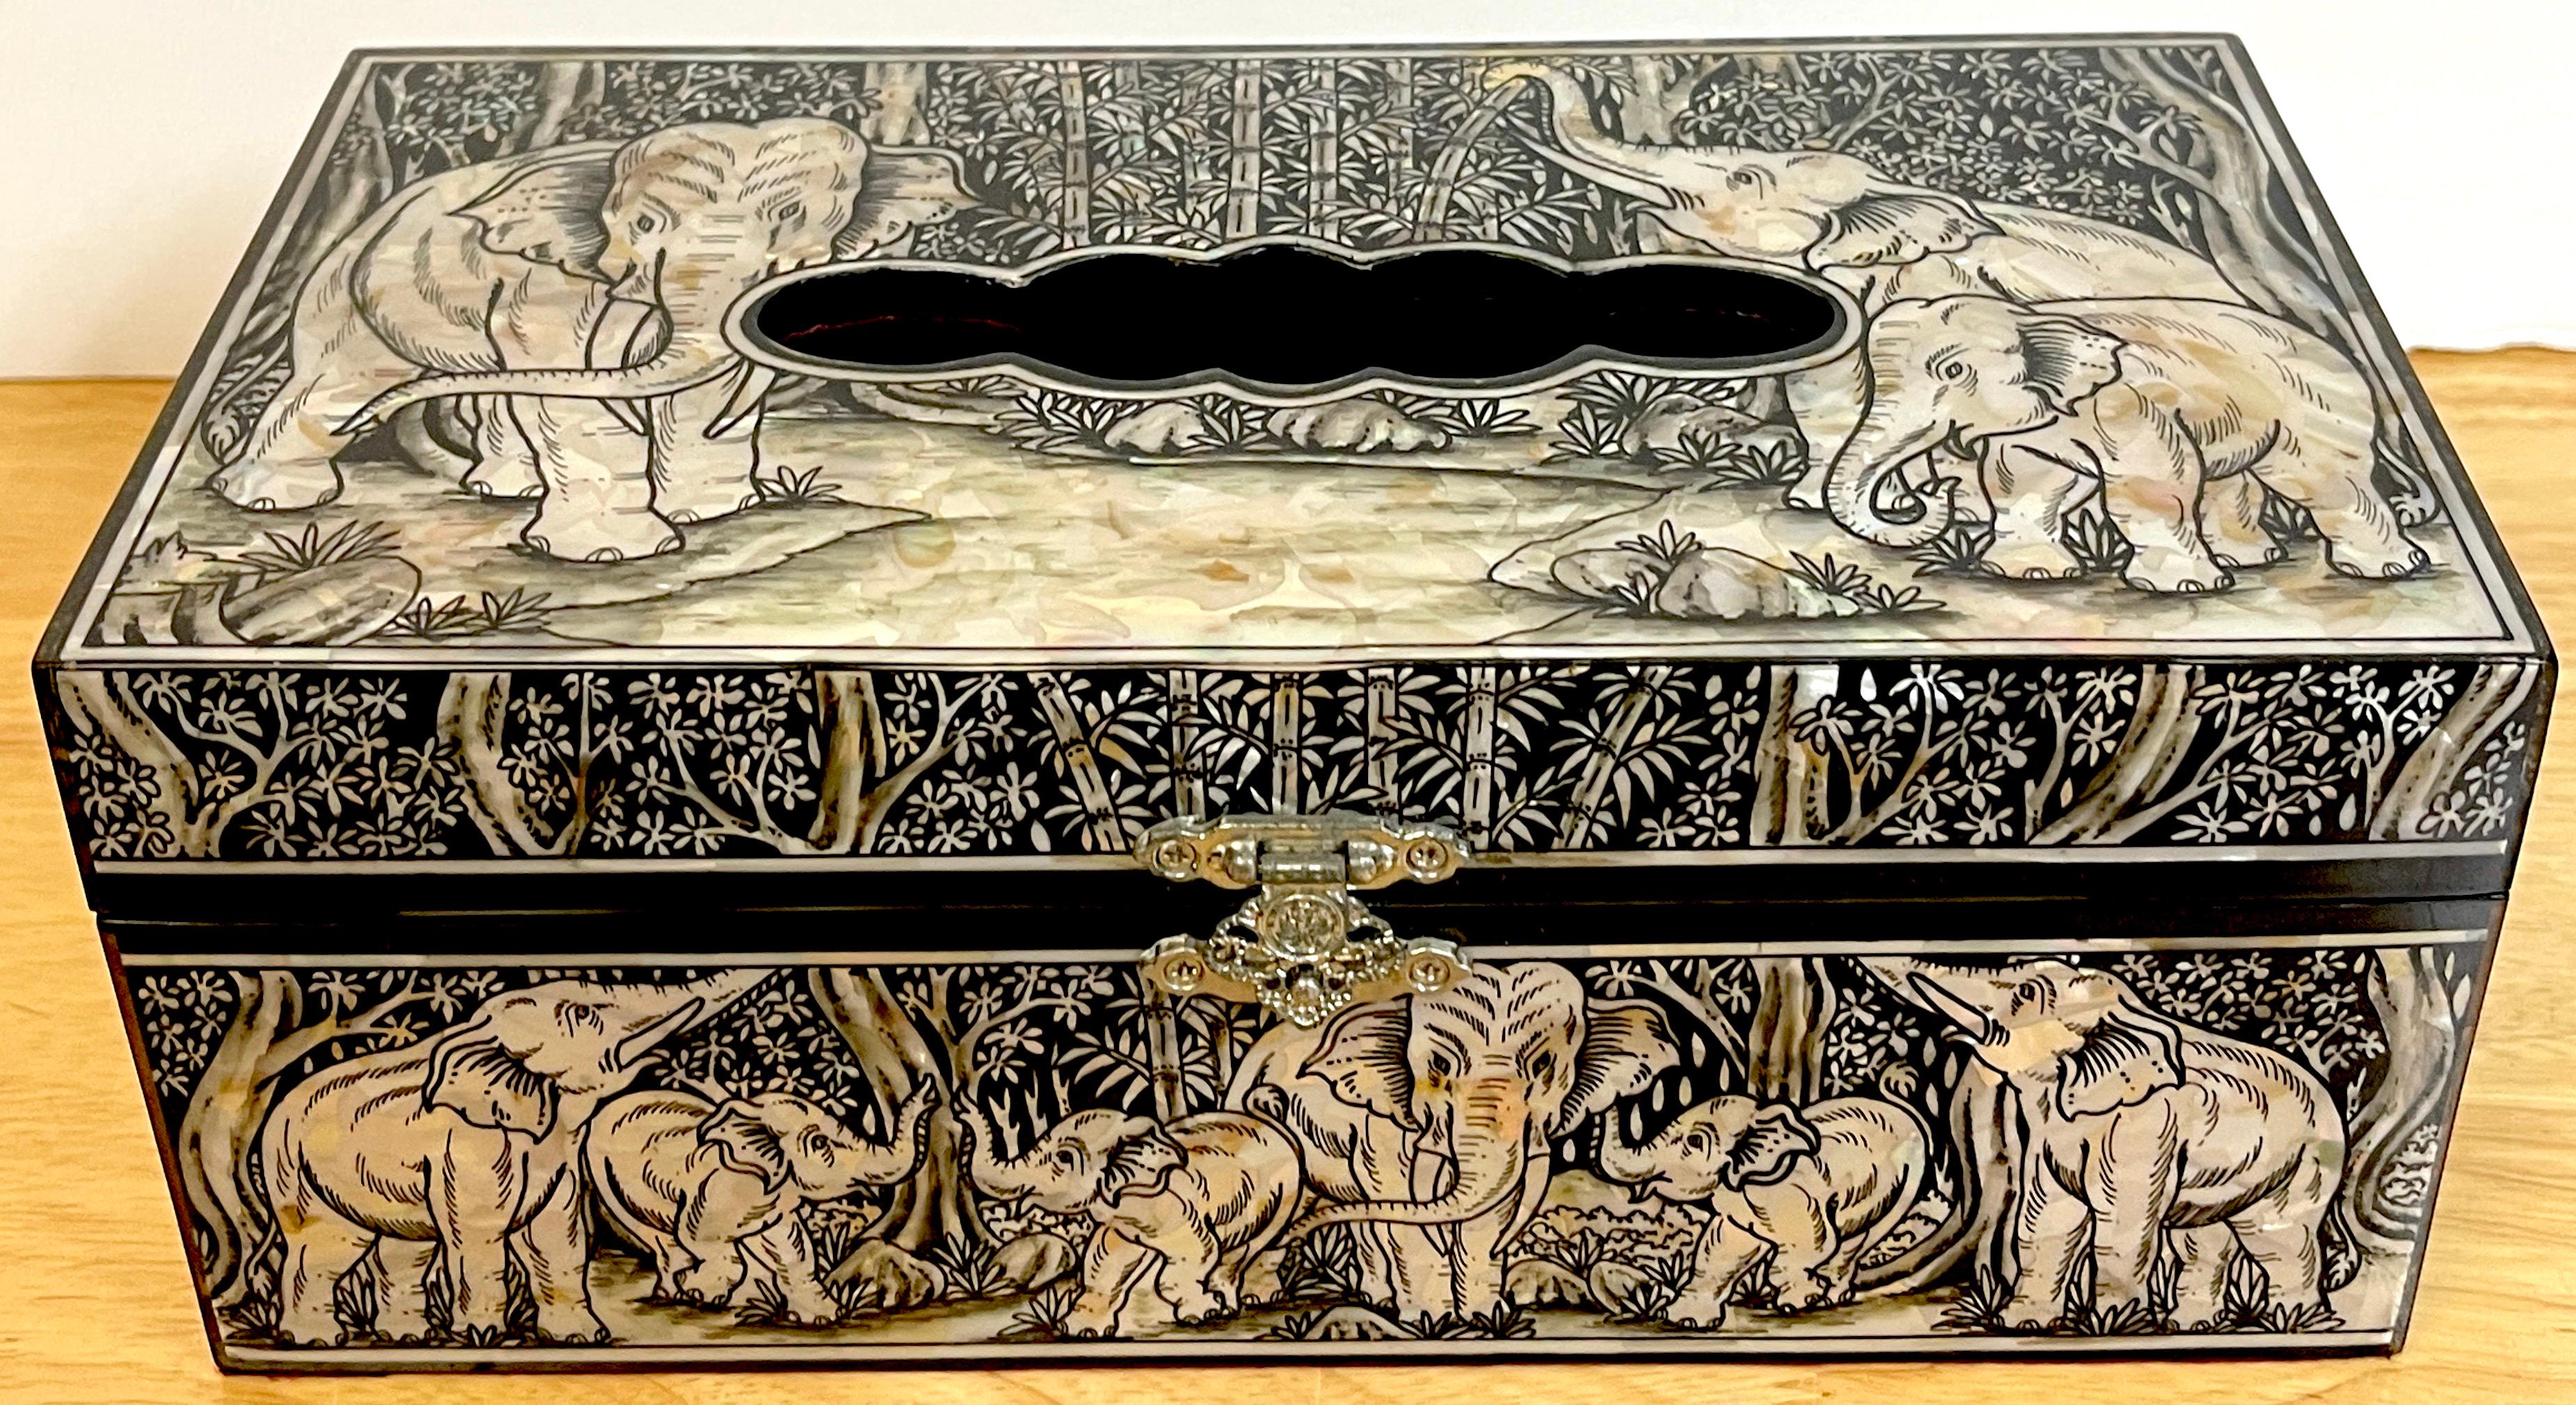 Exquisite mother of pearl inlaid lacquer elephant motif tissue box, 
Intricately inlaid all over with numerous elephants in landscape. Fitted with a silverplated clasp, and a velvet interior. 
The scalloped opening measures 5.5